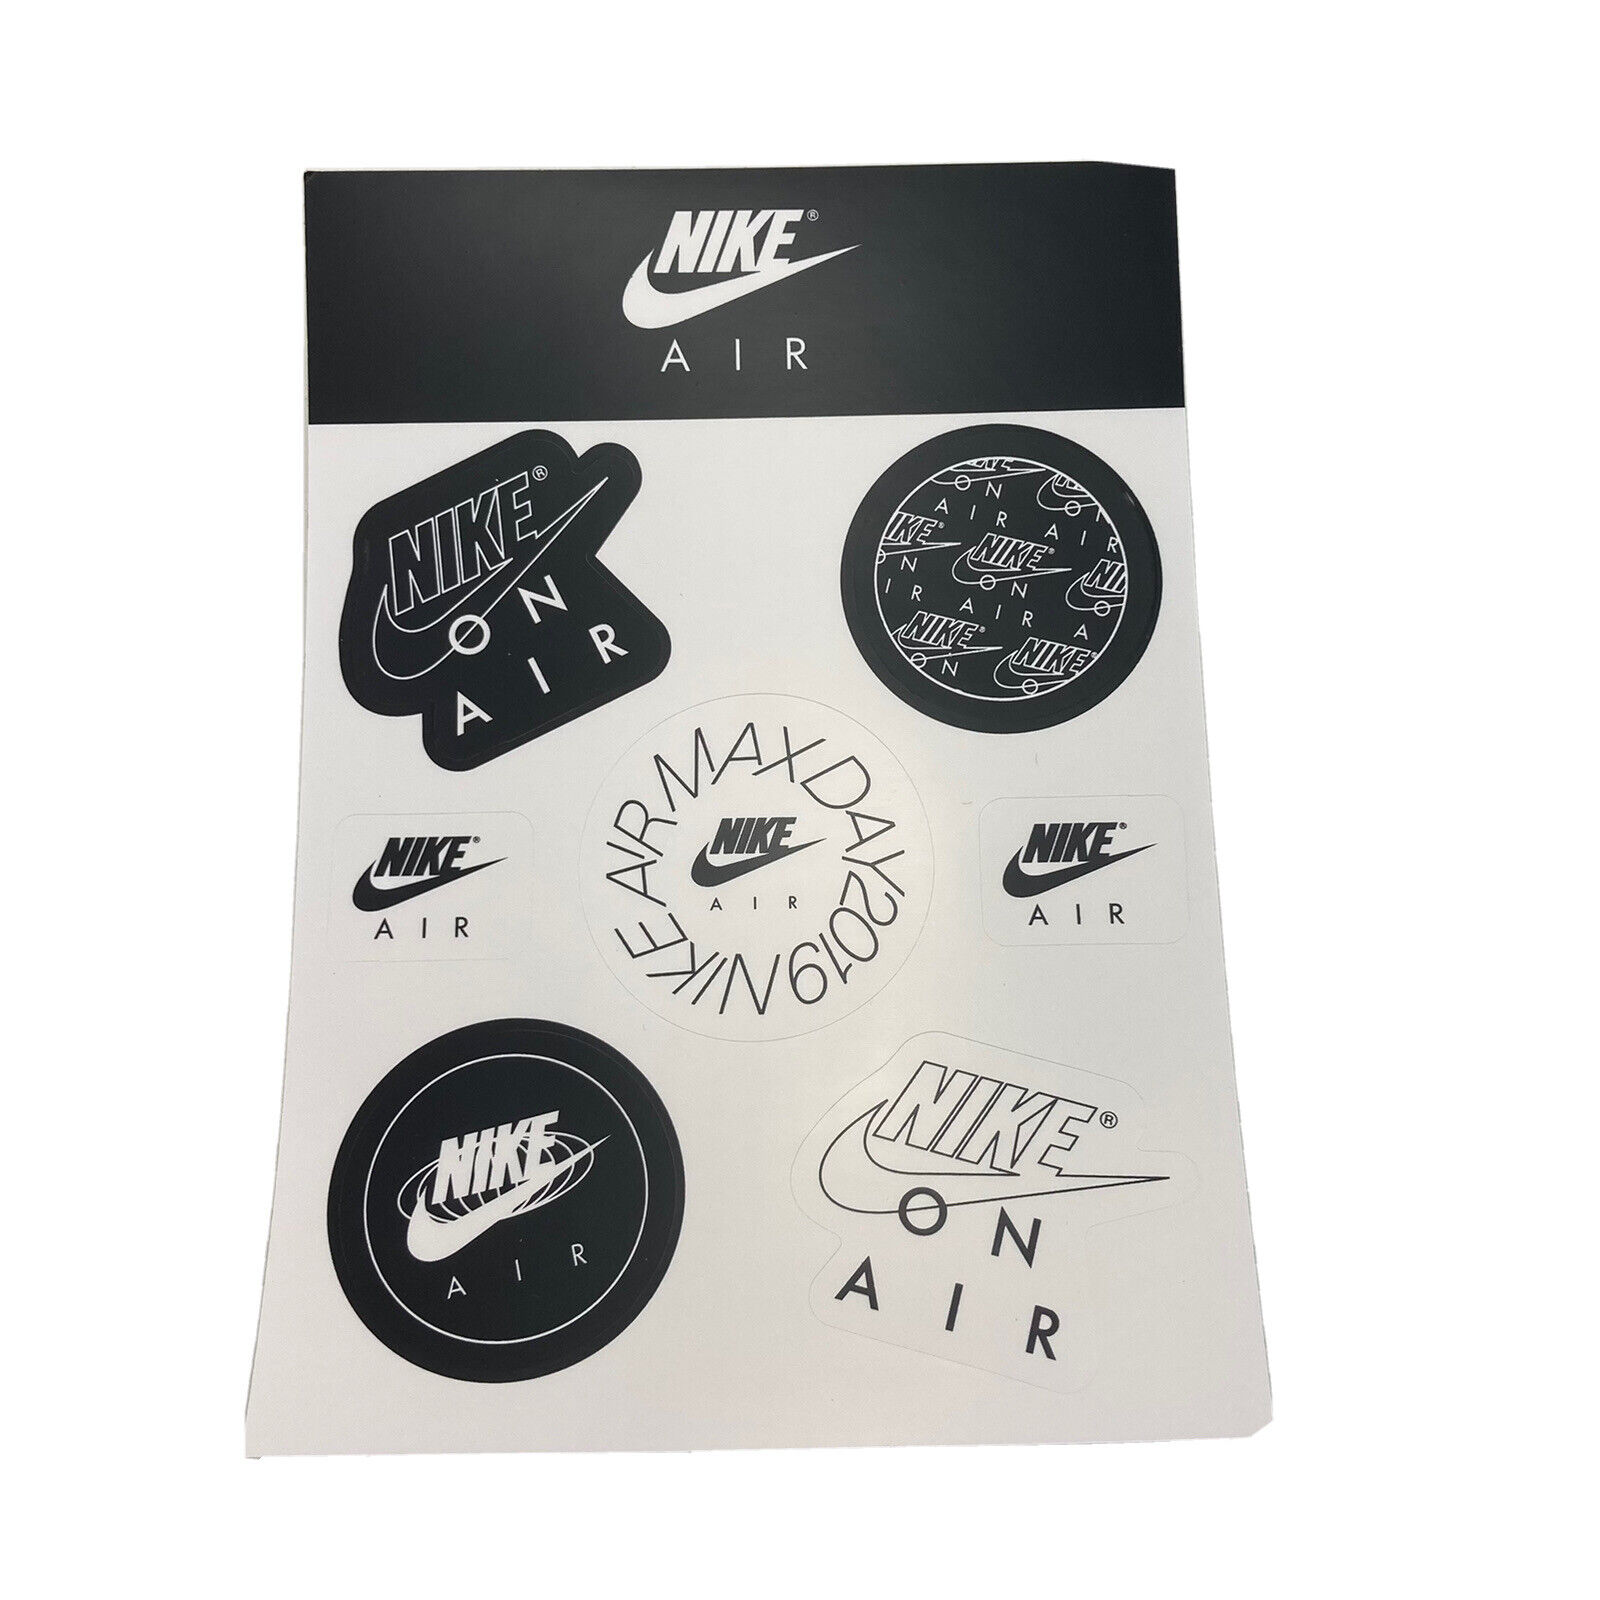 Nike Air Max Day 2019 On Air Swoosh Stickers Sheet Black White 7 Stickers